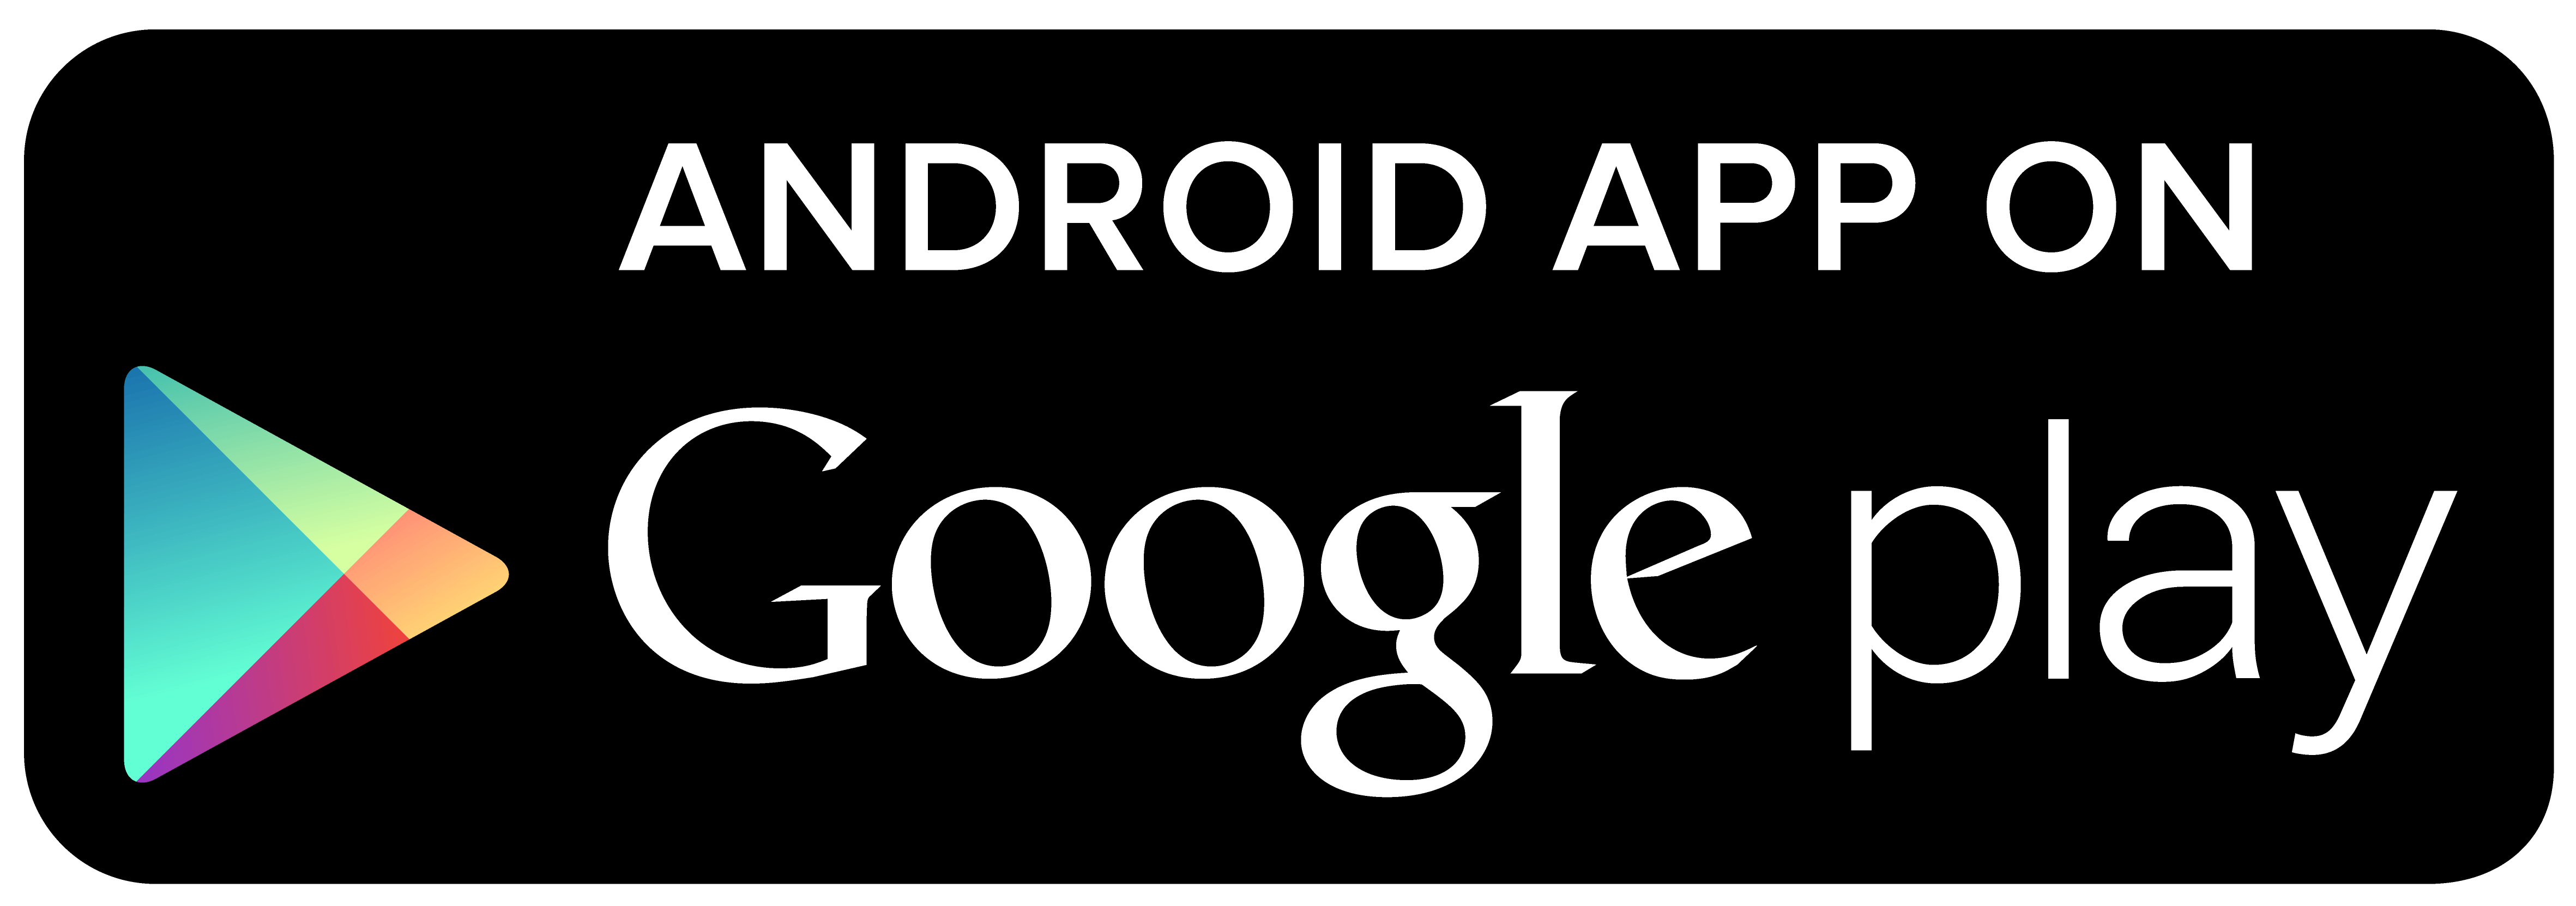 Google Play Store Logo - Play Store Logo Png (93+ images in Collection) Page 1